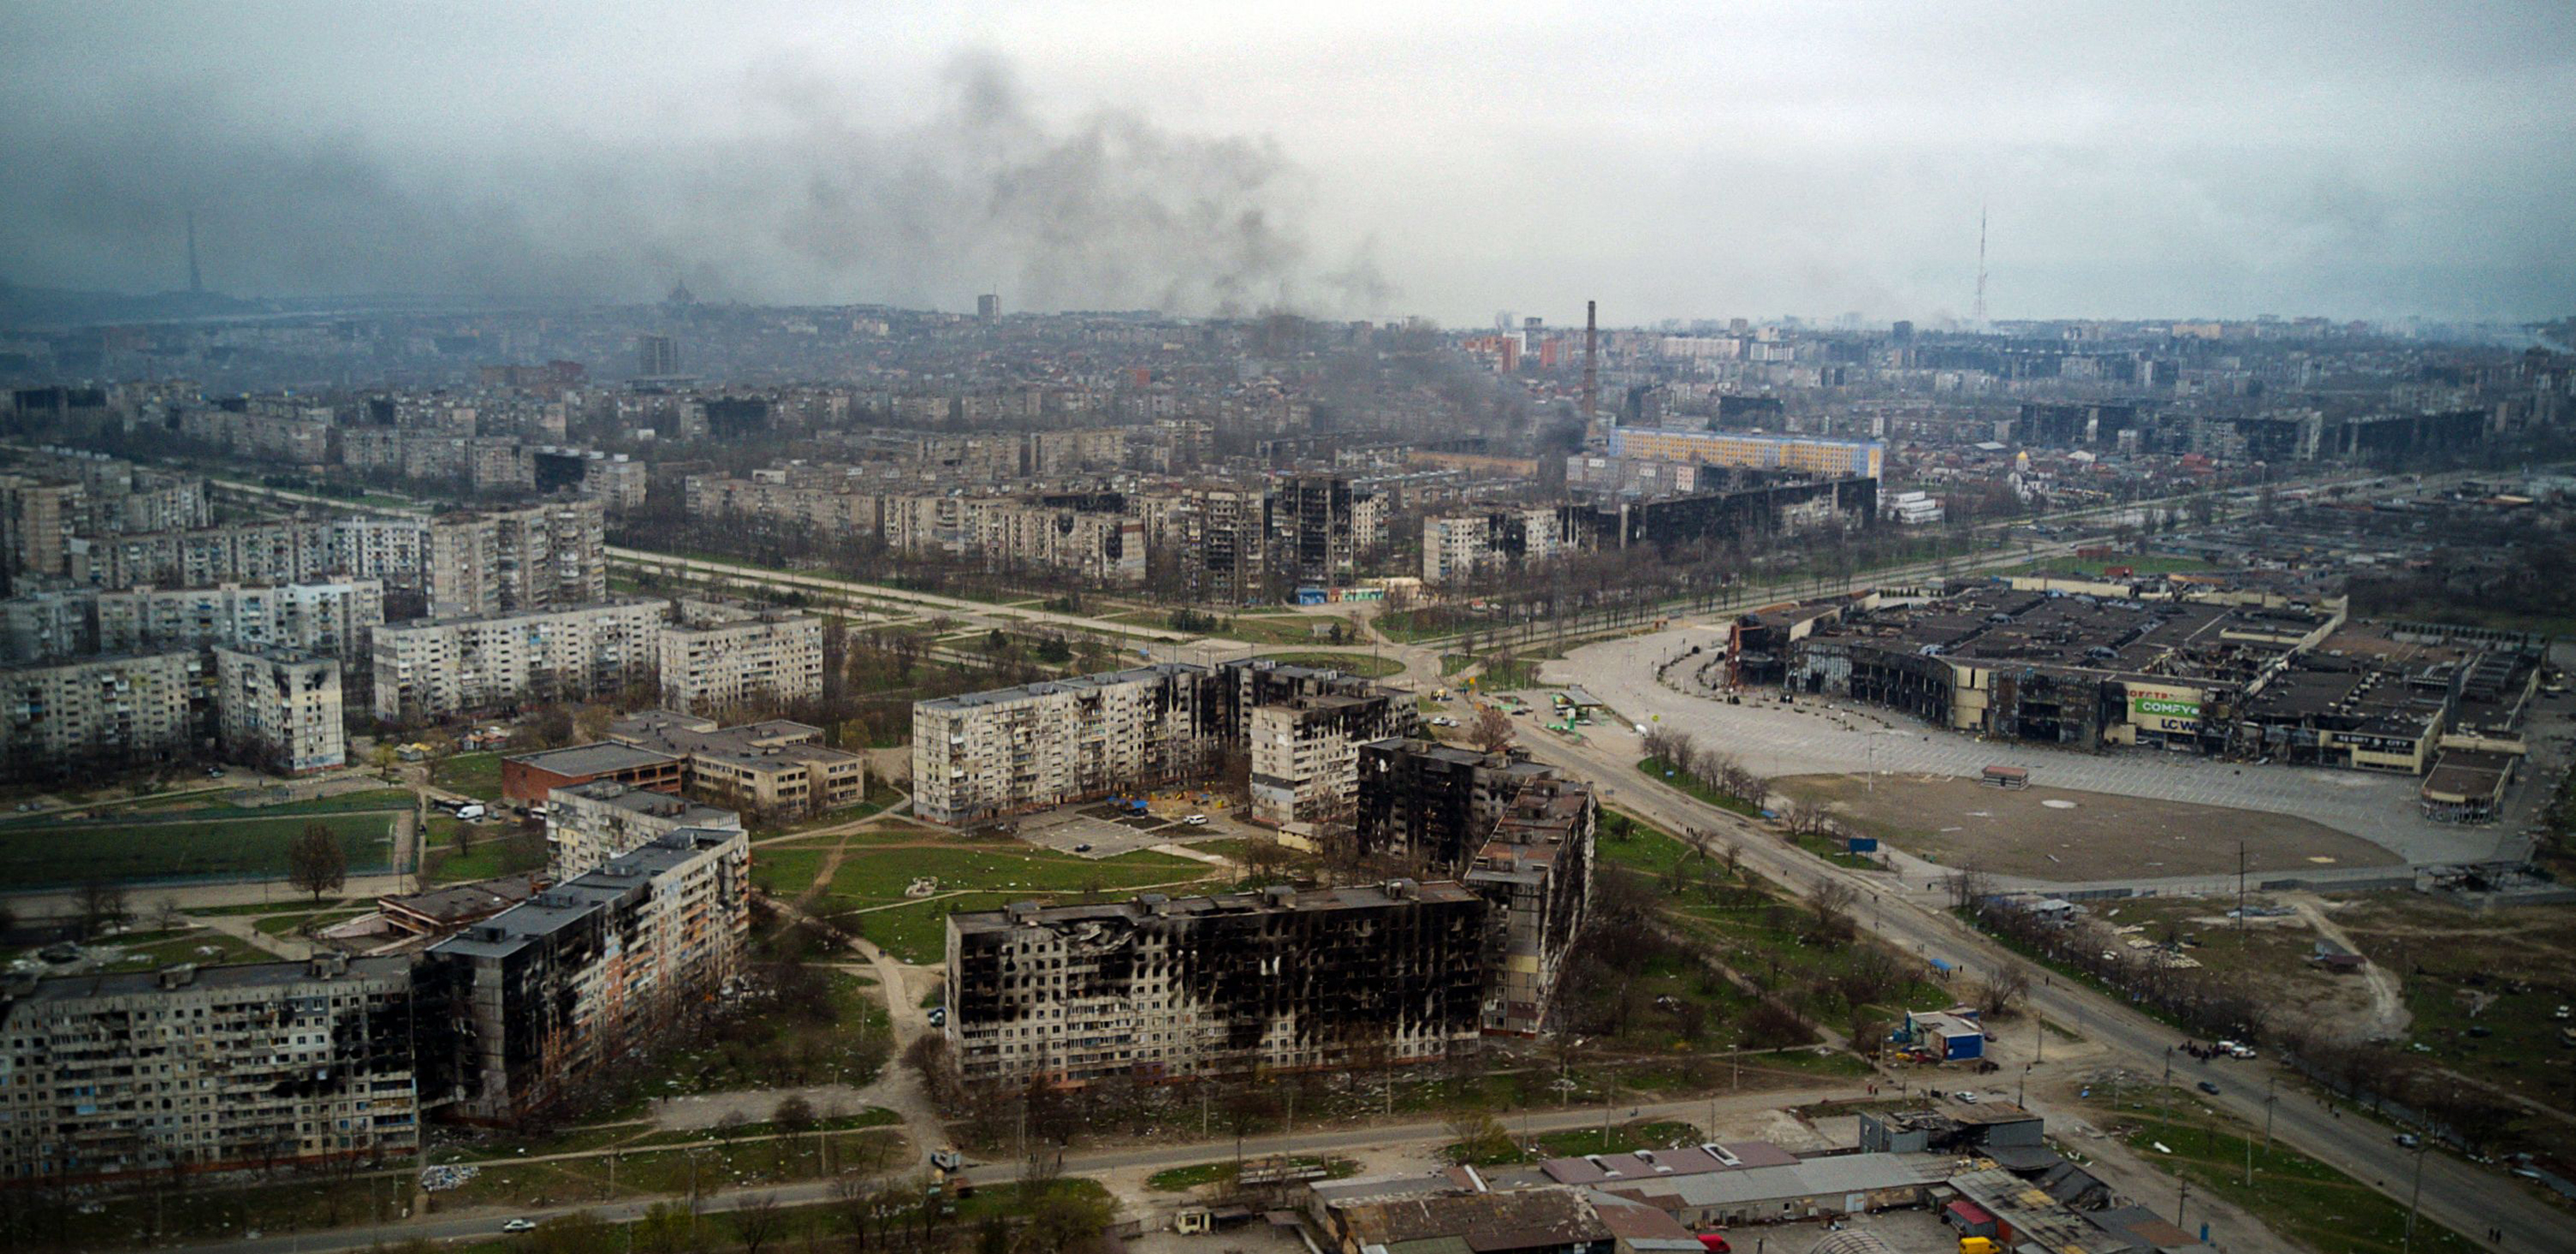 An aerial view of the city of Mariupol, Ukraine on April 12.